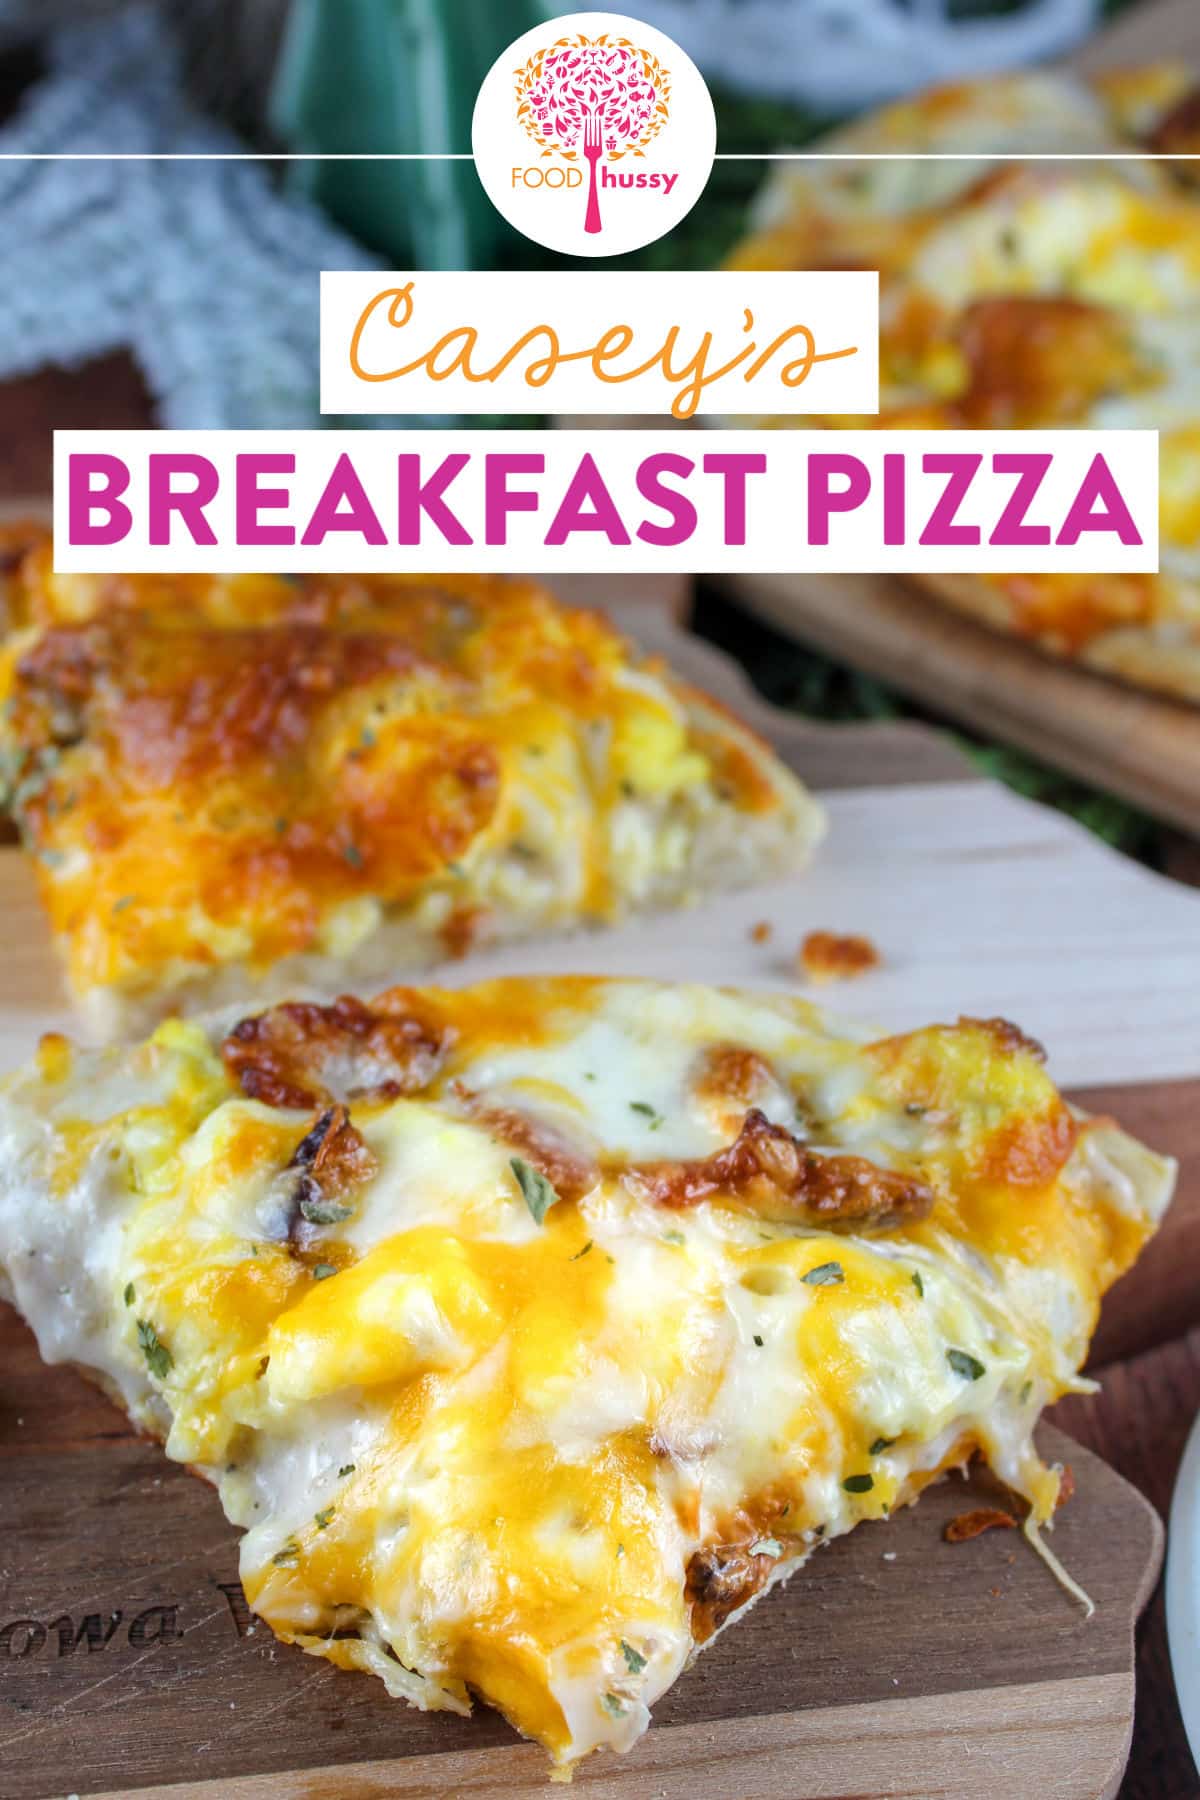 Yum! Casey's General Store is known for their tasty breakfast pizzas. Now you can make a copycat version of Casey's Breakfast Pizza with this recipe. via @foodhussy